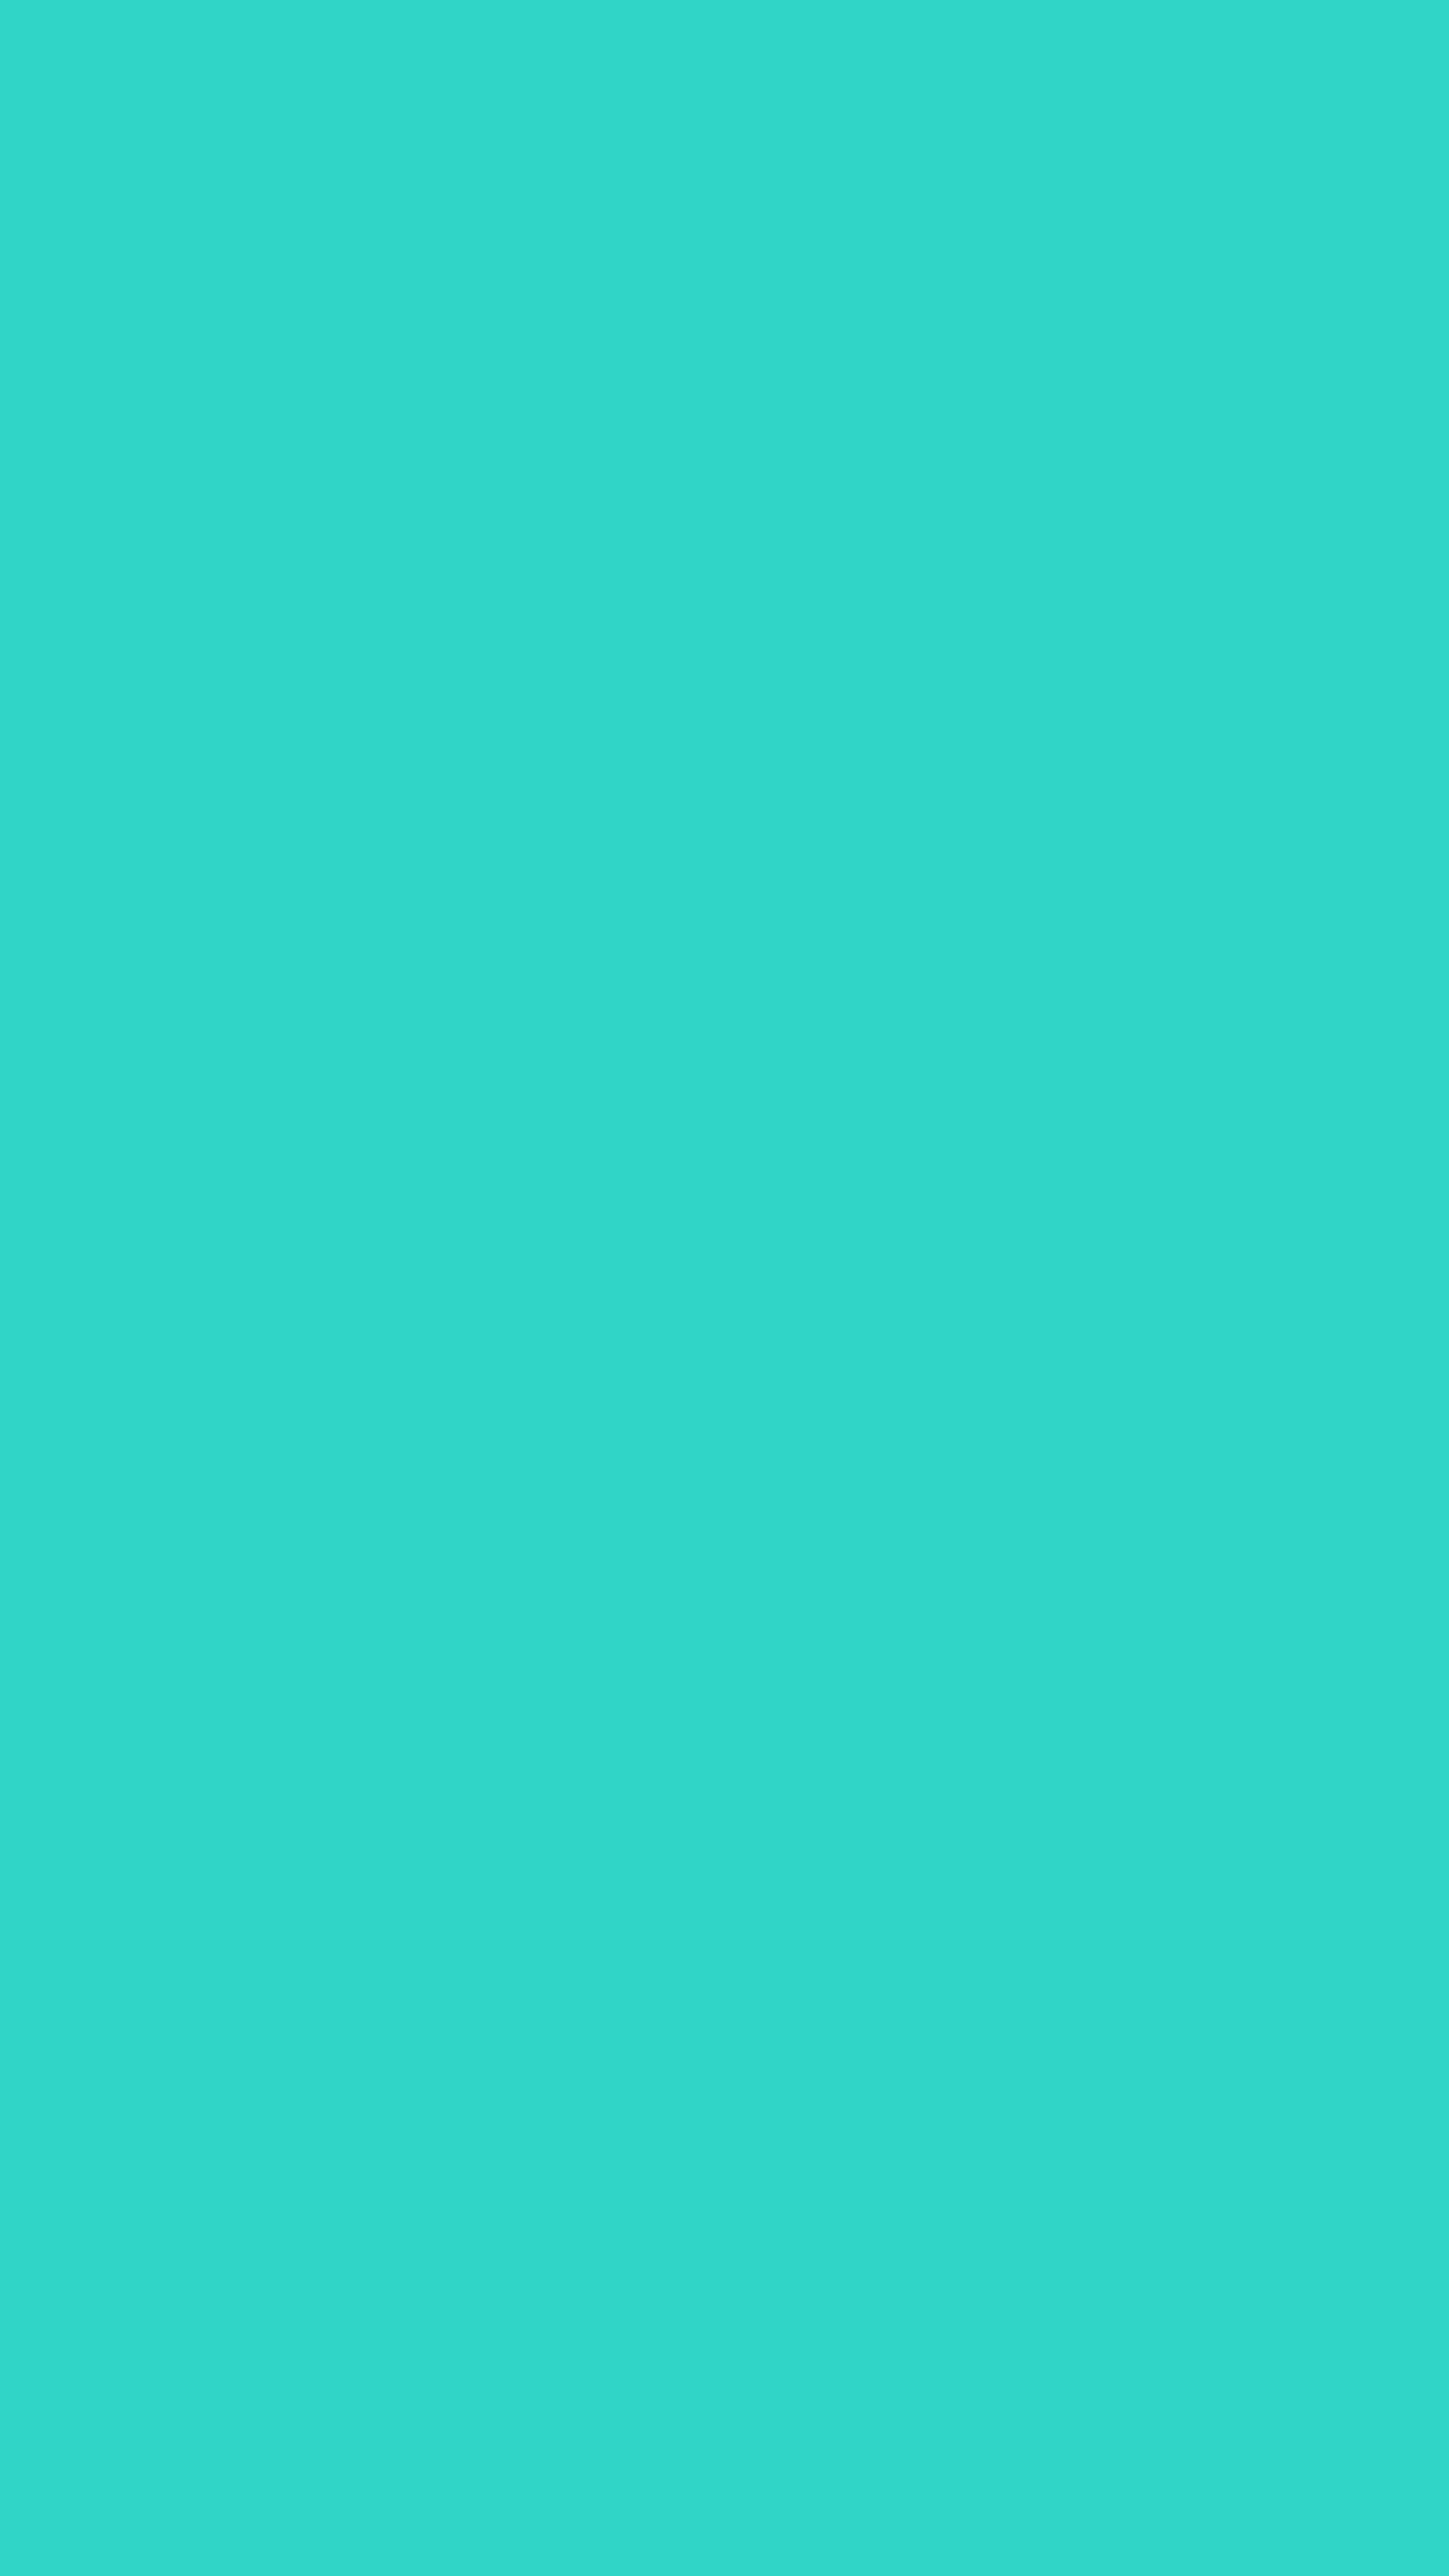 Turquoise Solid Color Background Wallpaper for Mobile Phone